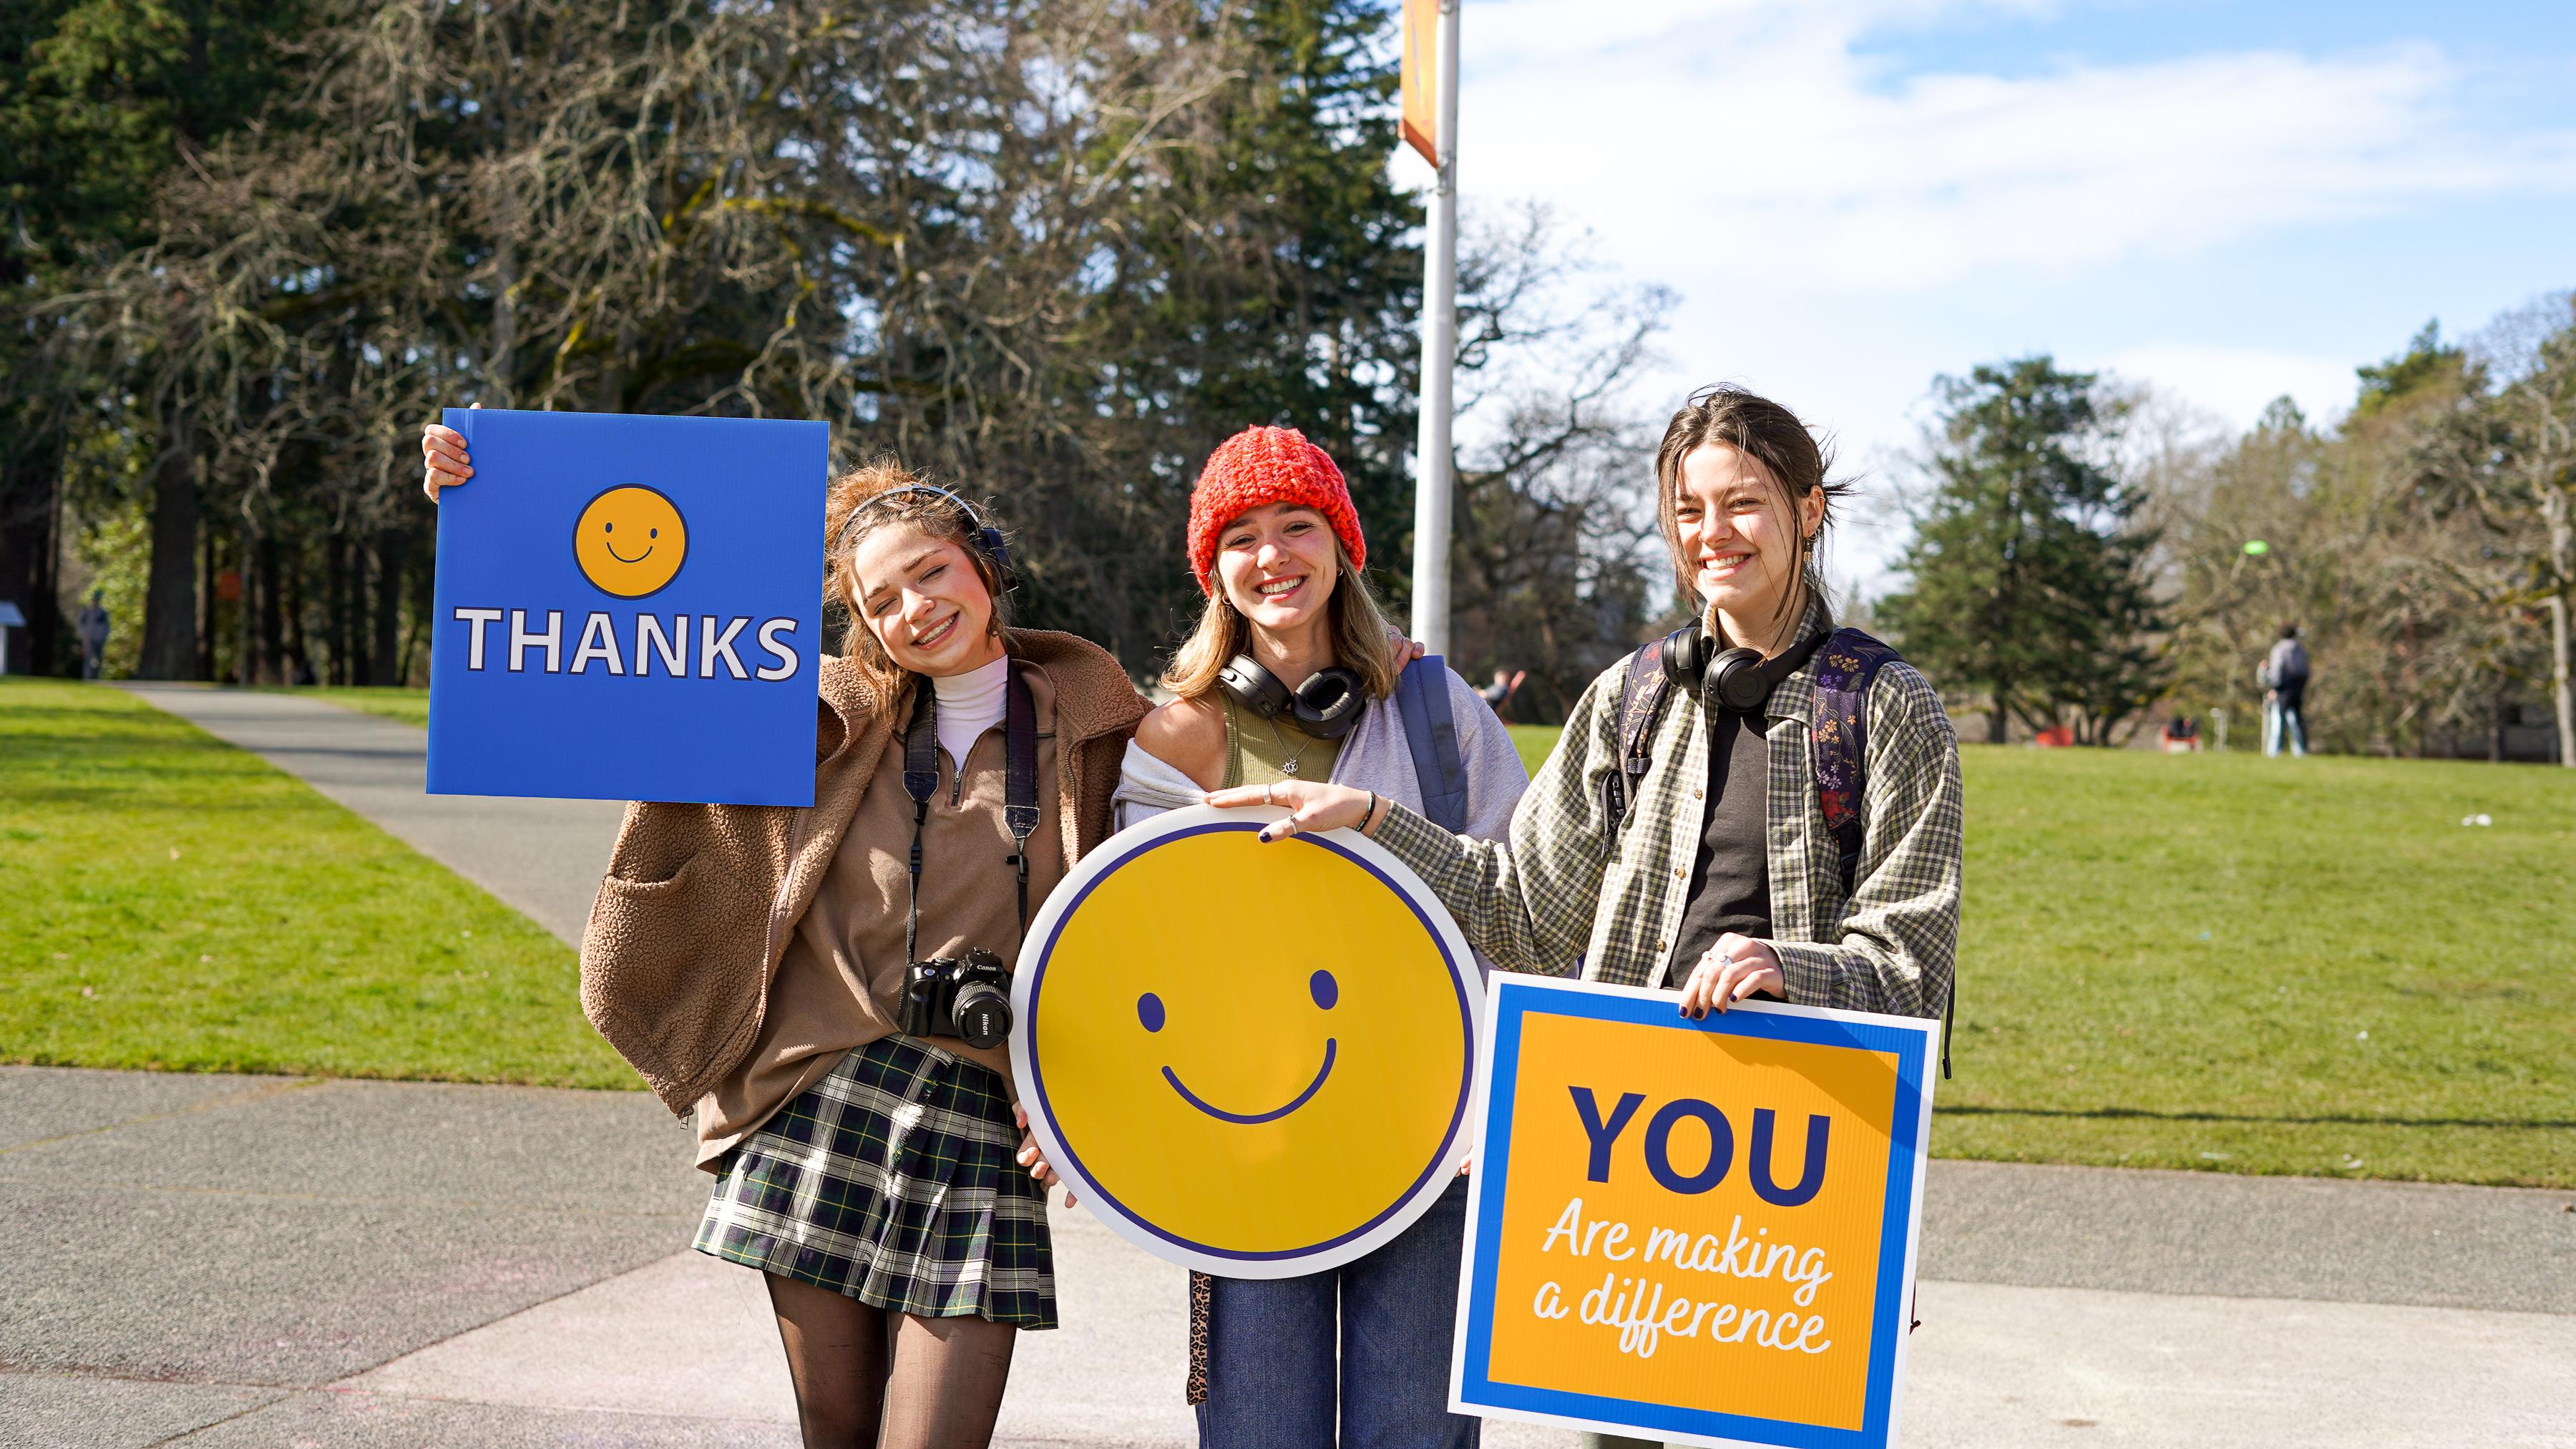 Three female students stand together smiling and holding signs, from left to right the signs are "Thanks", a giant yellow smiley, "you are making a difference" 